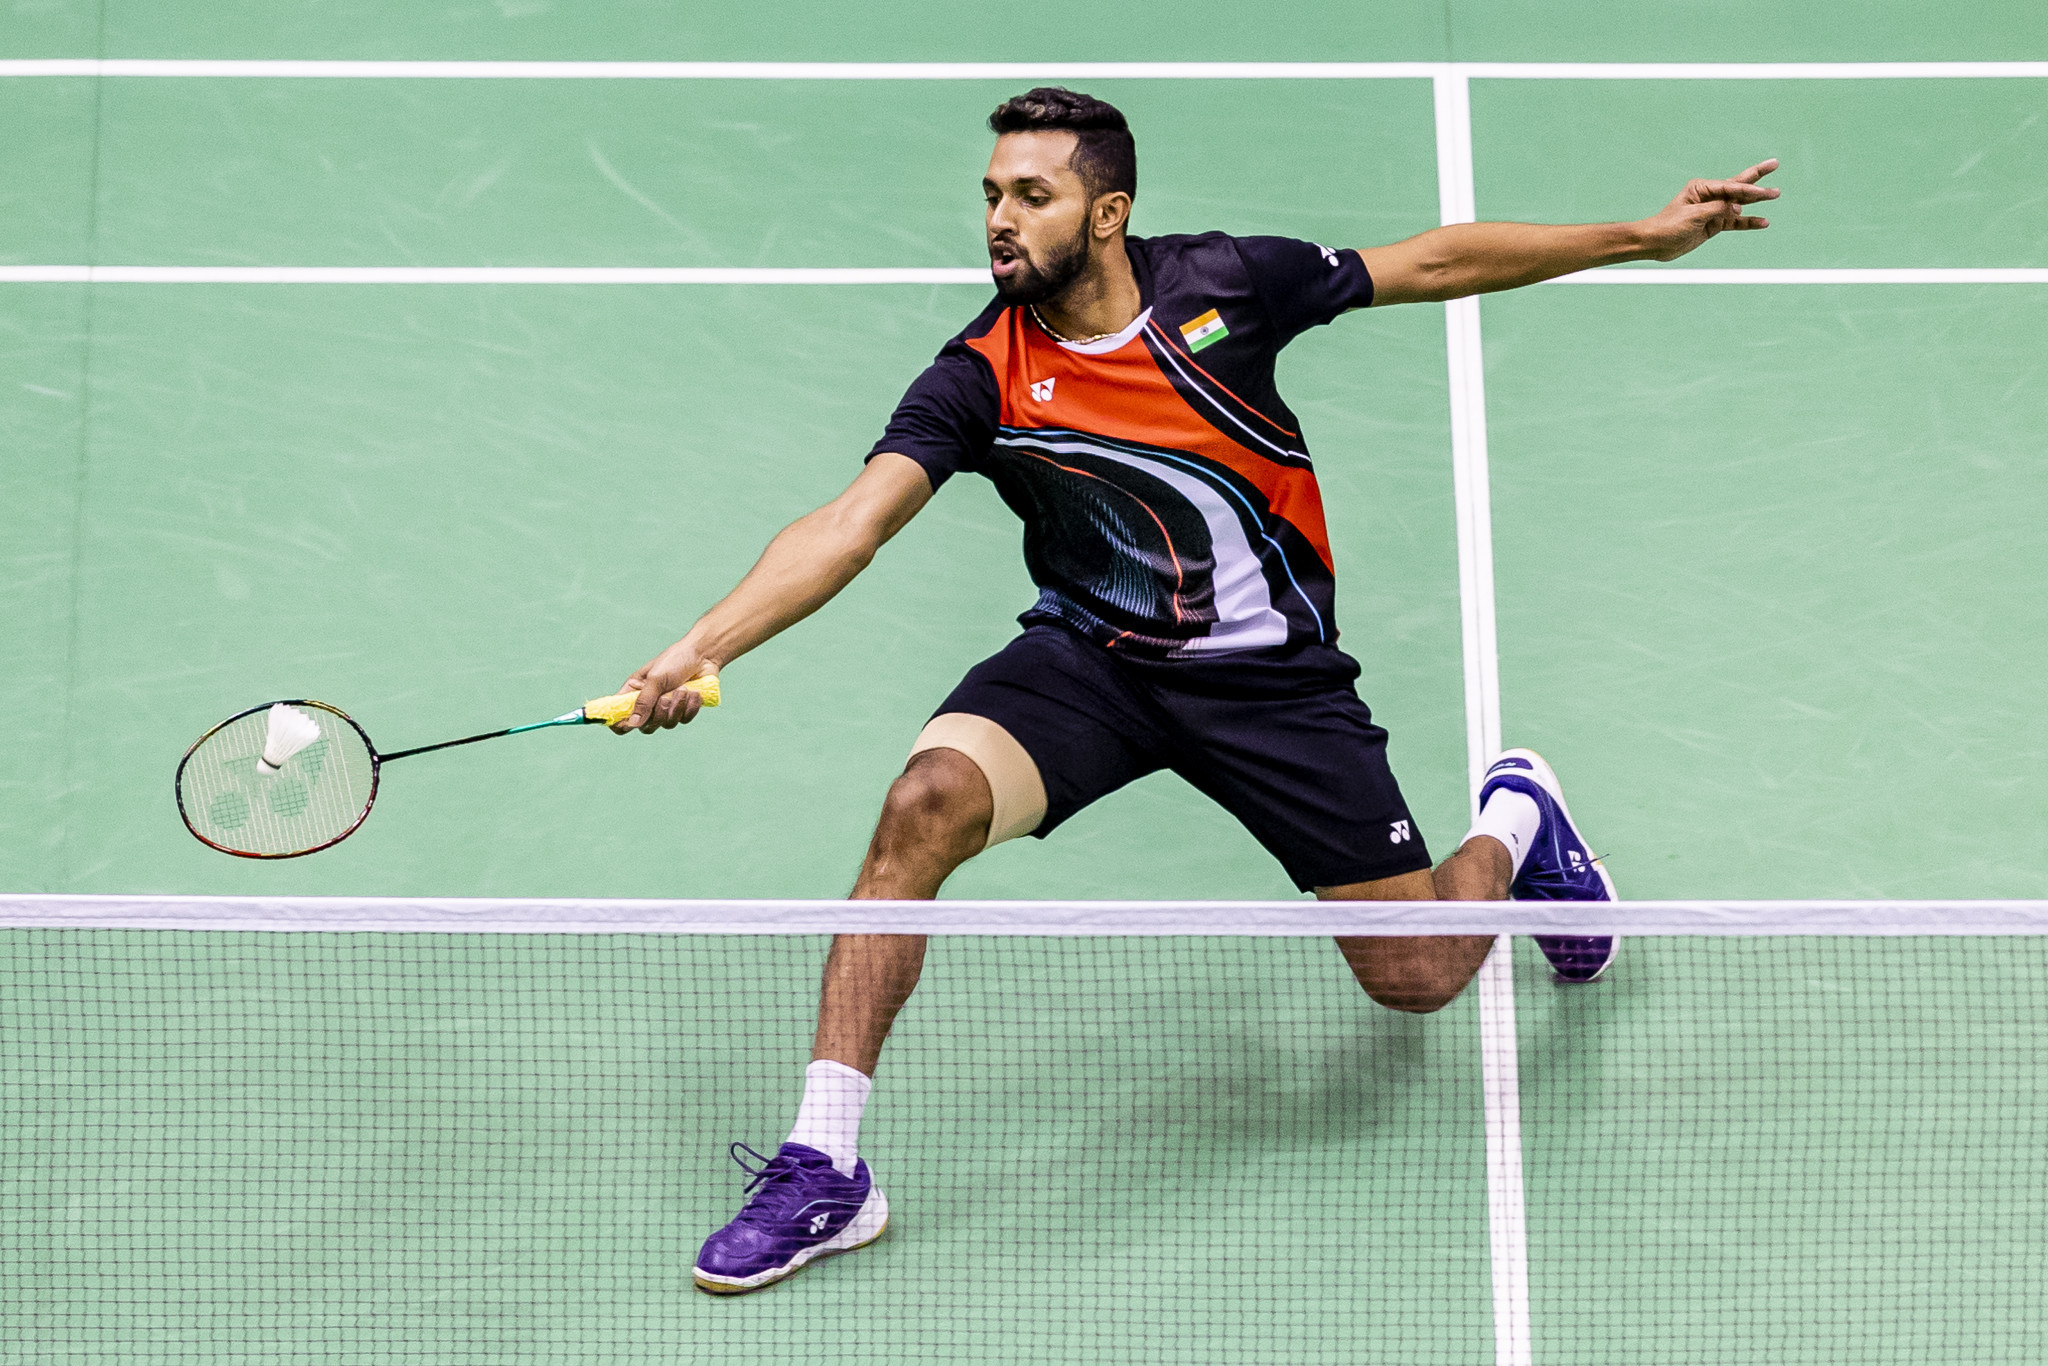 Kumar Prannoy overcame Viktor Axelsen to reach the quarter-finals of the BWF Indonesia Masters ©Getty Images